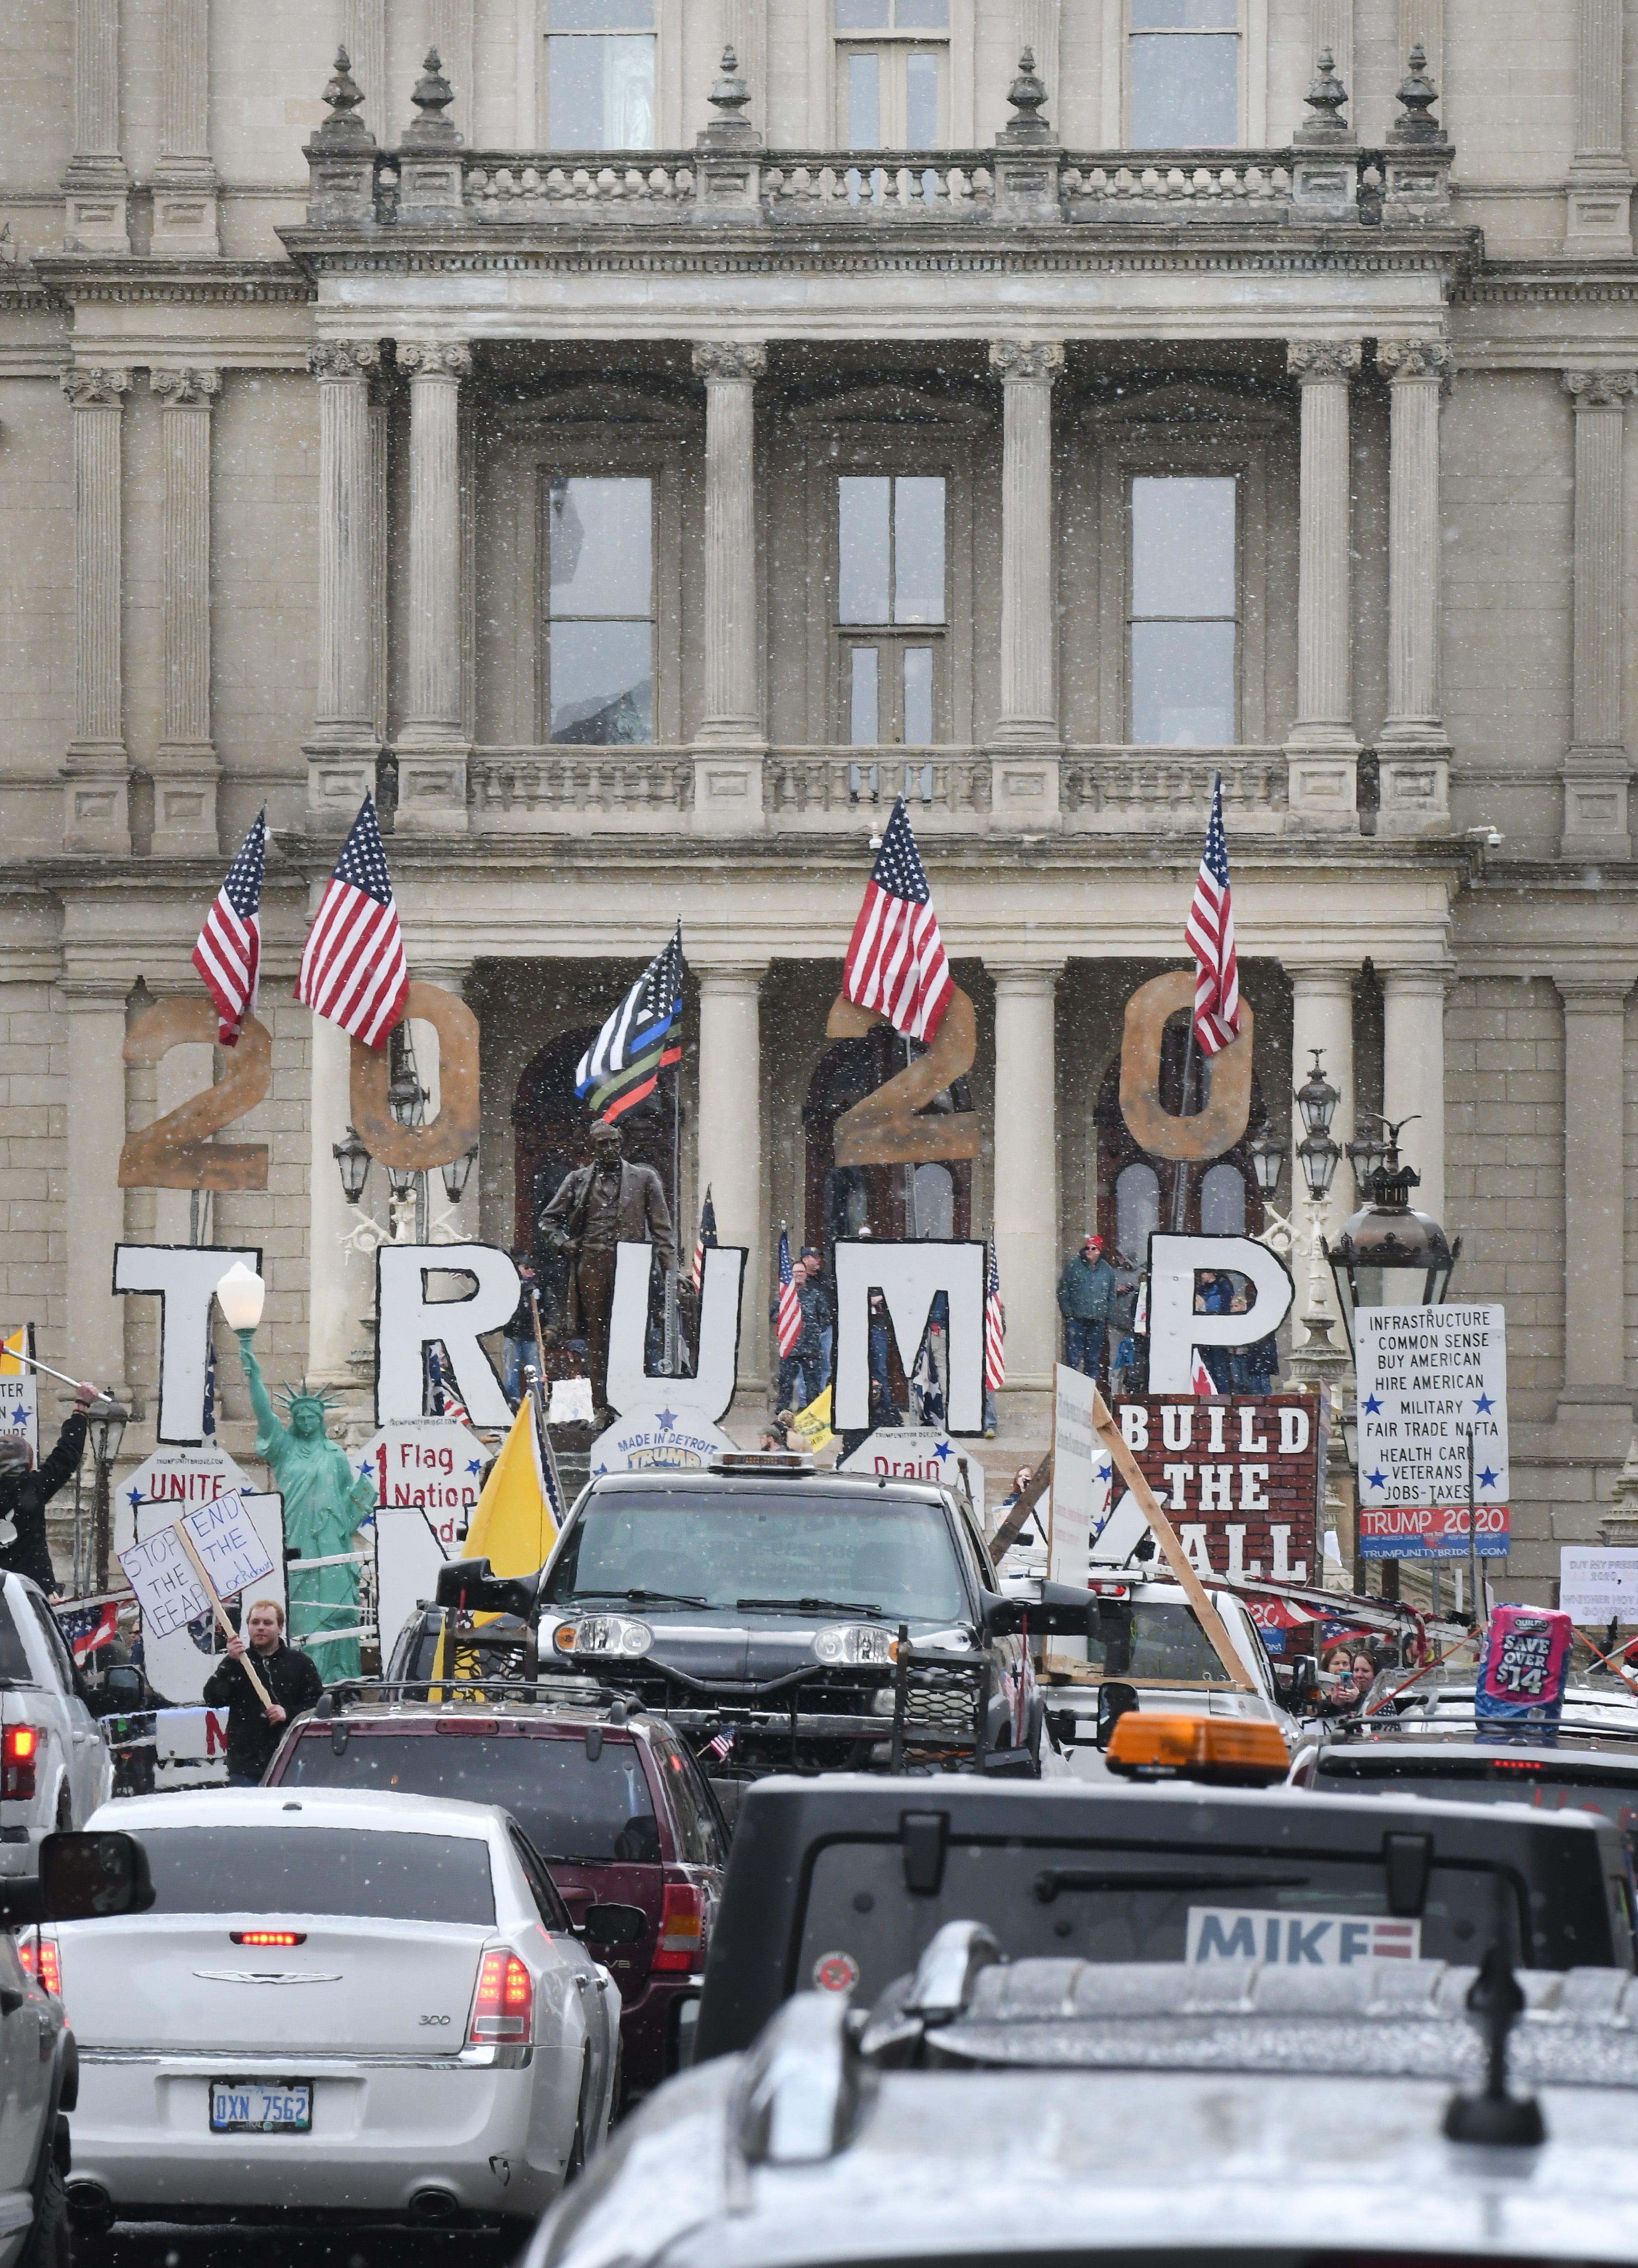 The Trump Unity Bridge pulls up in front of the Michigan State Capitol in Lansing during "Operation Gridlock."